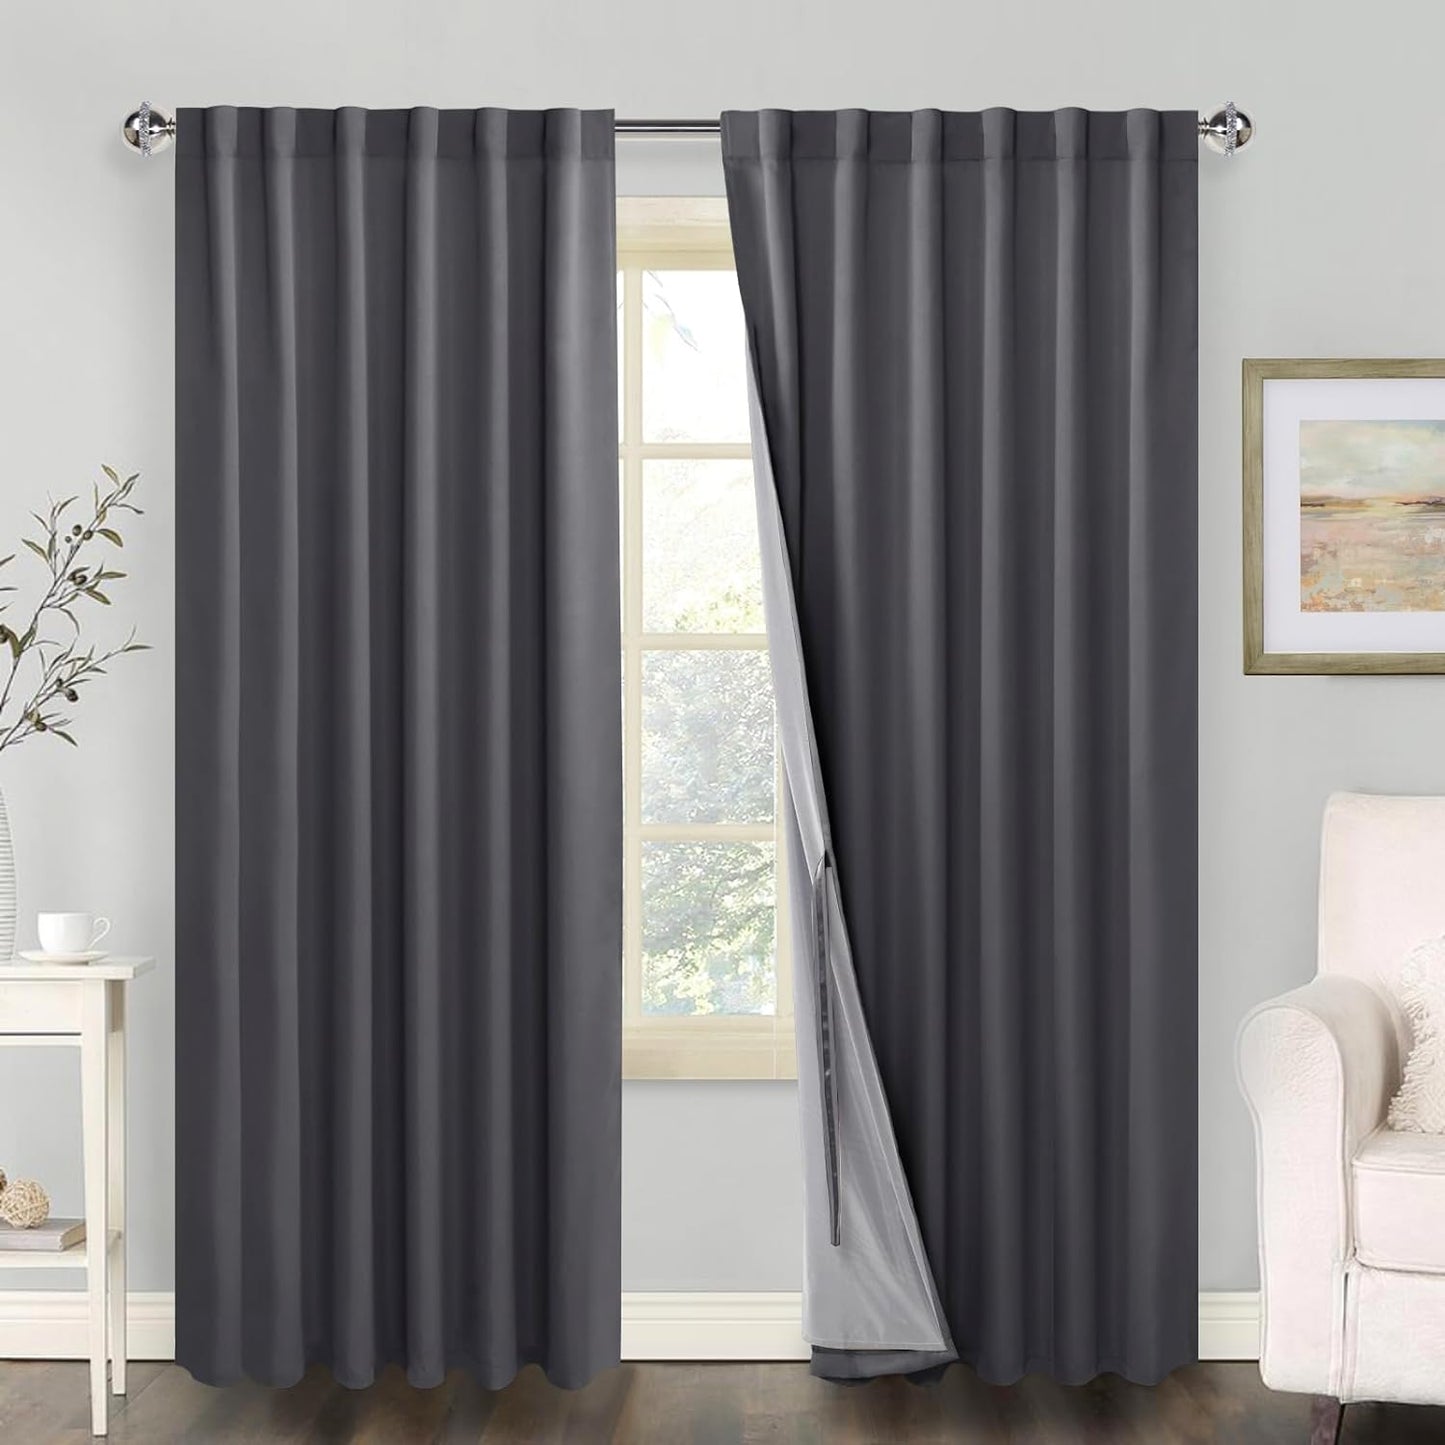 100% Blackout Curtains 2 Panels with Tiebacks- Heat and Full Light Blocking Window Treatment with Black Liner for Bedroom/Nursery, Rod Pocket & Back Tab，White, W52 X L84 Inches Long, Set of 2  XWZO Dark Grey W52" X L108"|2 Panels 